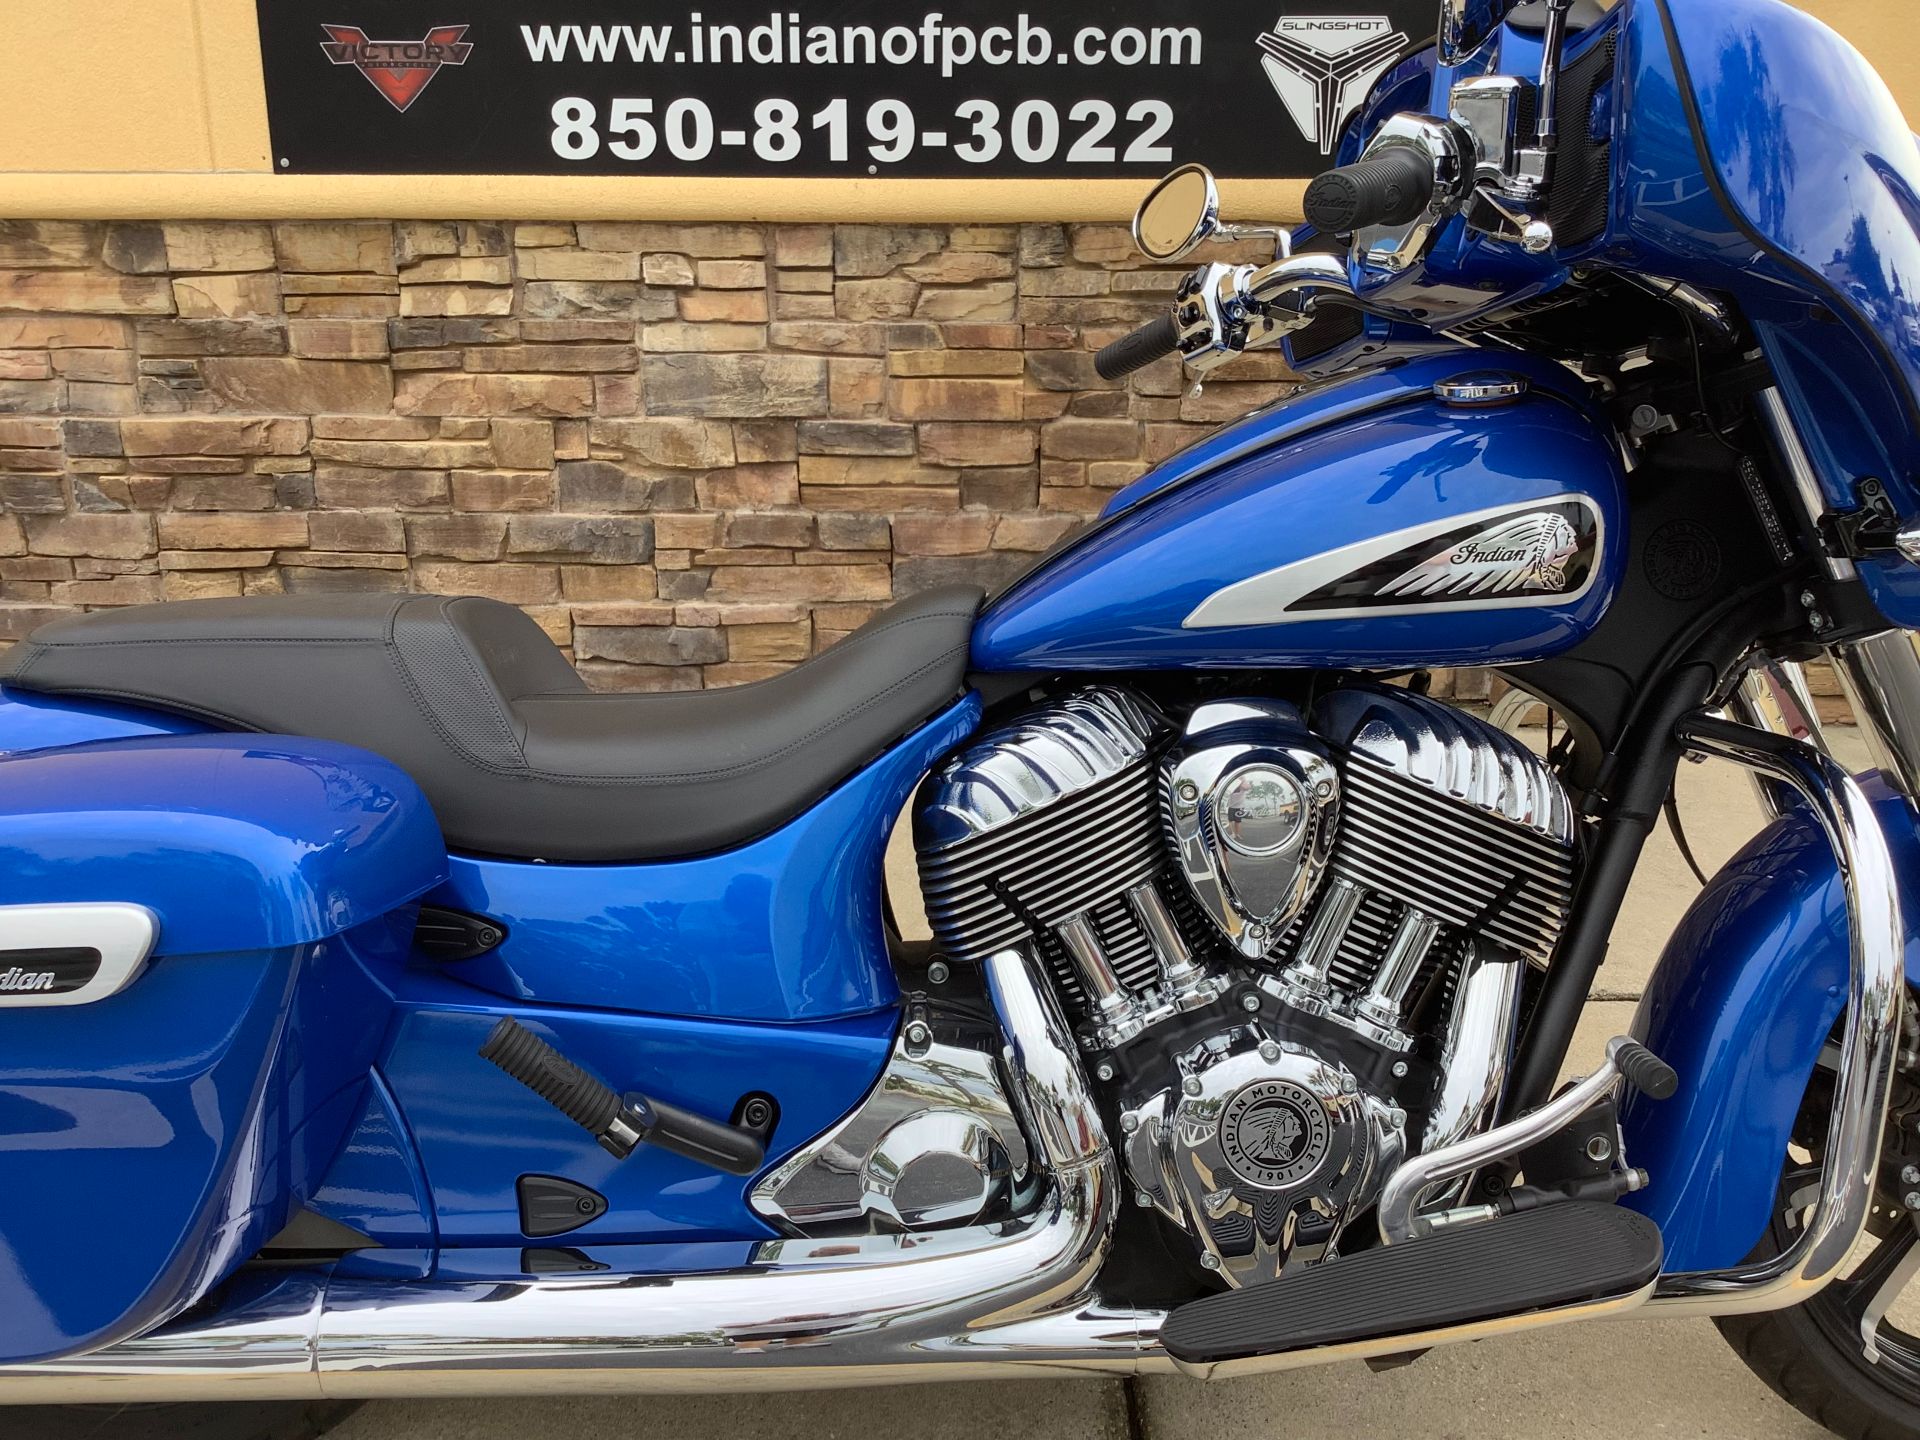 2020 Indian CHIEFTAIN LIMITED in Panama City Beach, Florida - Photo 4